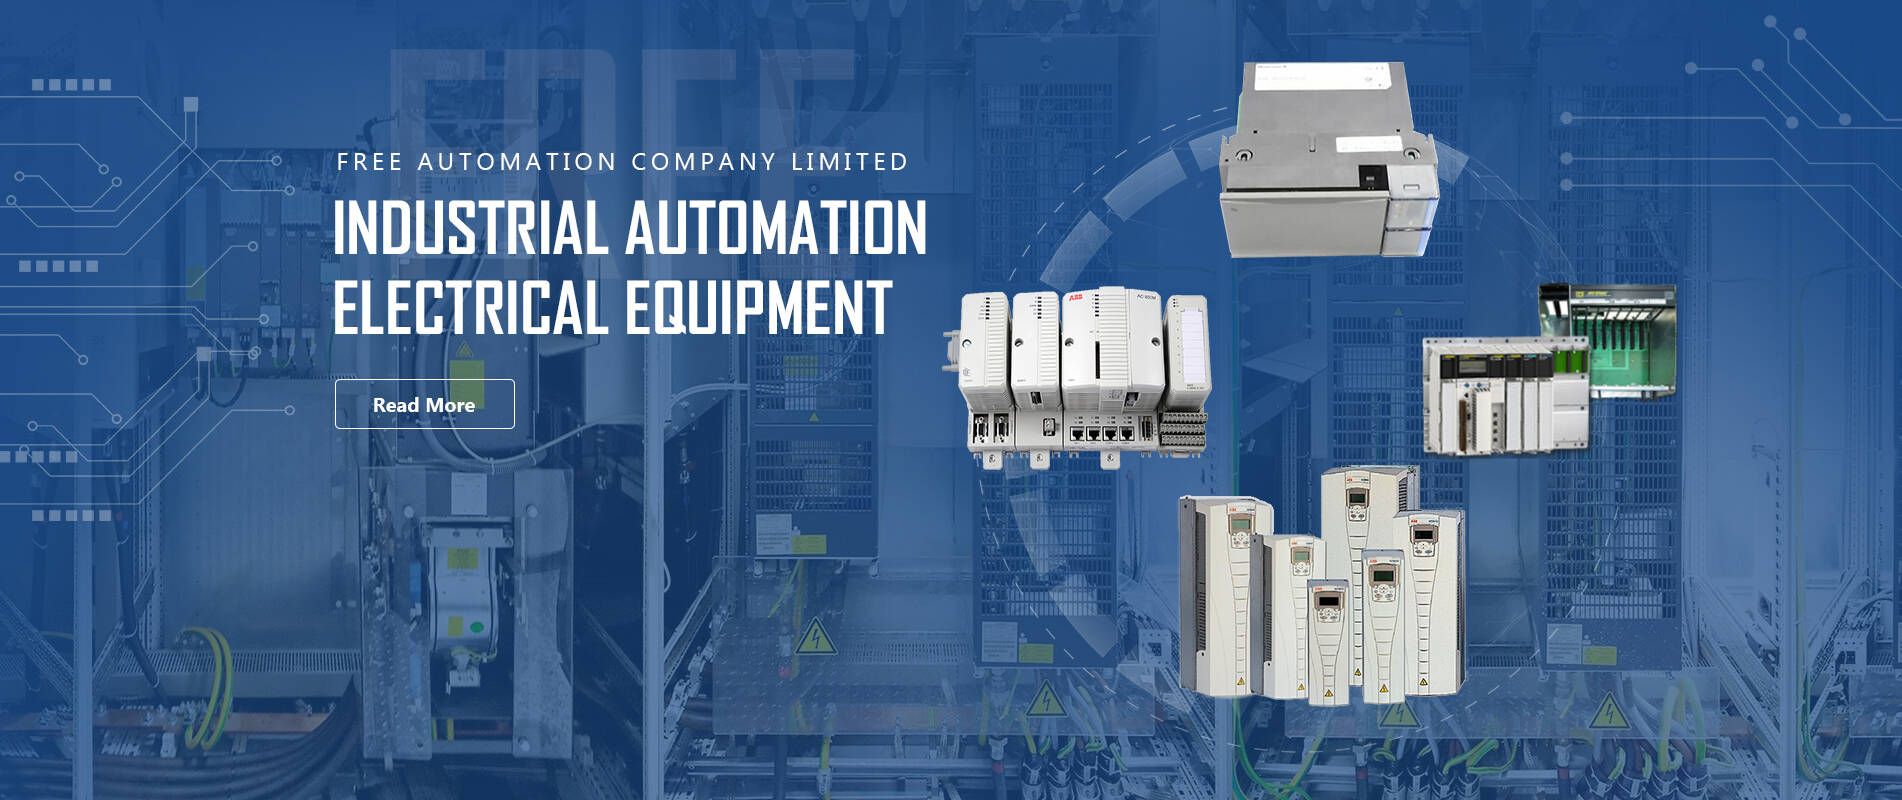 Industrial automation electrical equipment